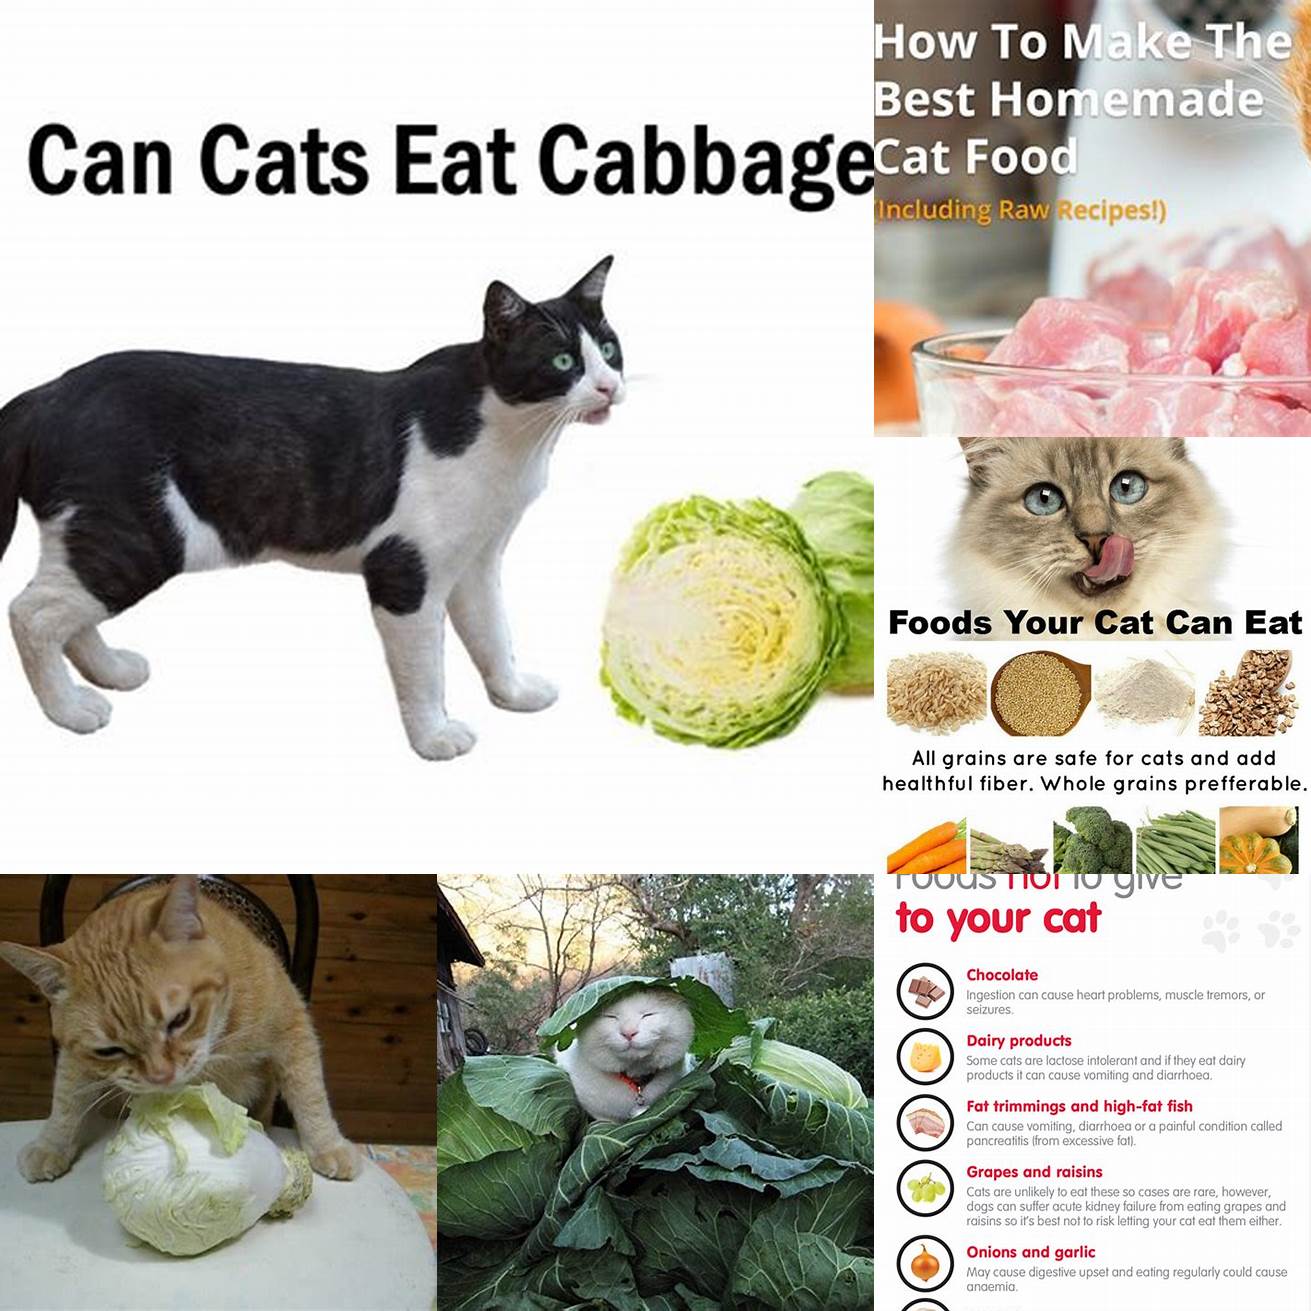 Q Can I give my cat cabbage as a supplement to their diet A While cabbage can provide some nutritional benefits to cats it should never replace a balanced meat-based diet Speak with your veterinarian about safe and appropriate supplements for your cats individual needs